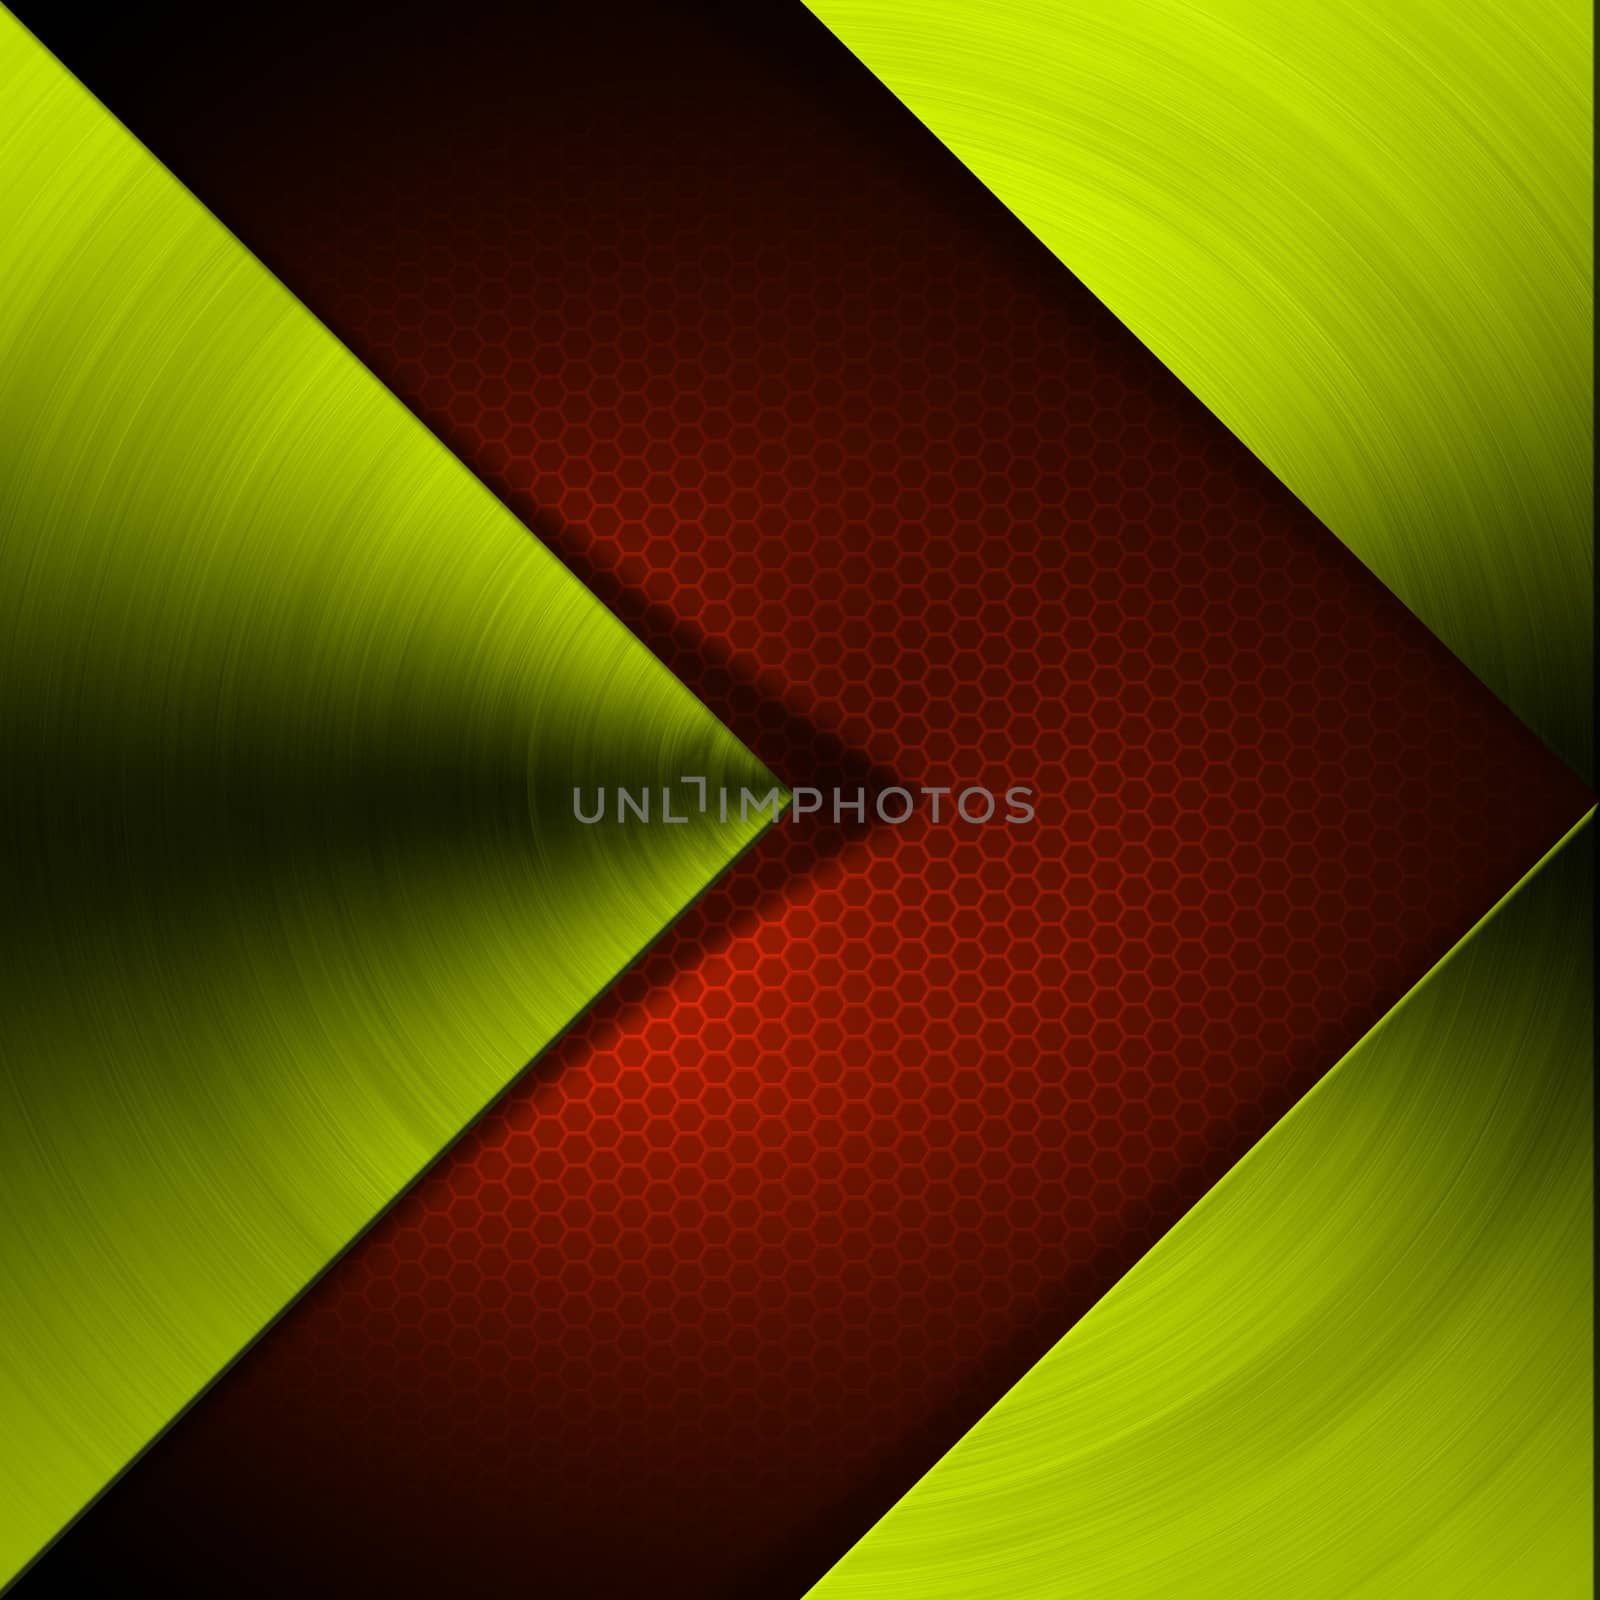 Metal abstract background with red and green arrow
